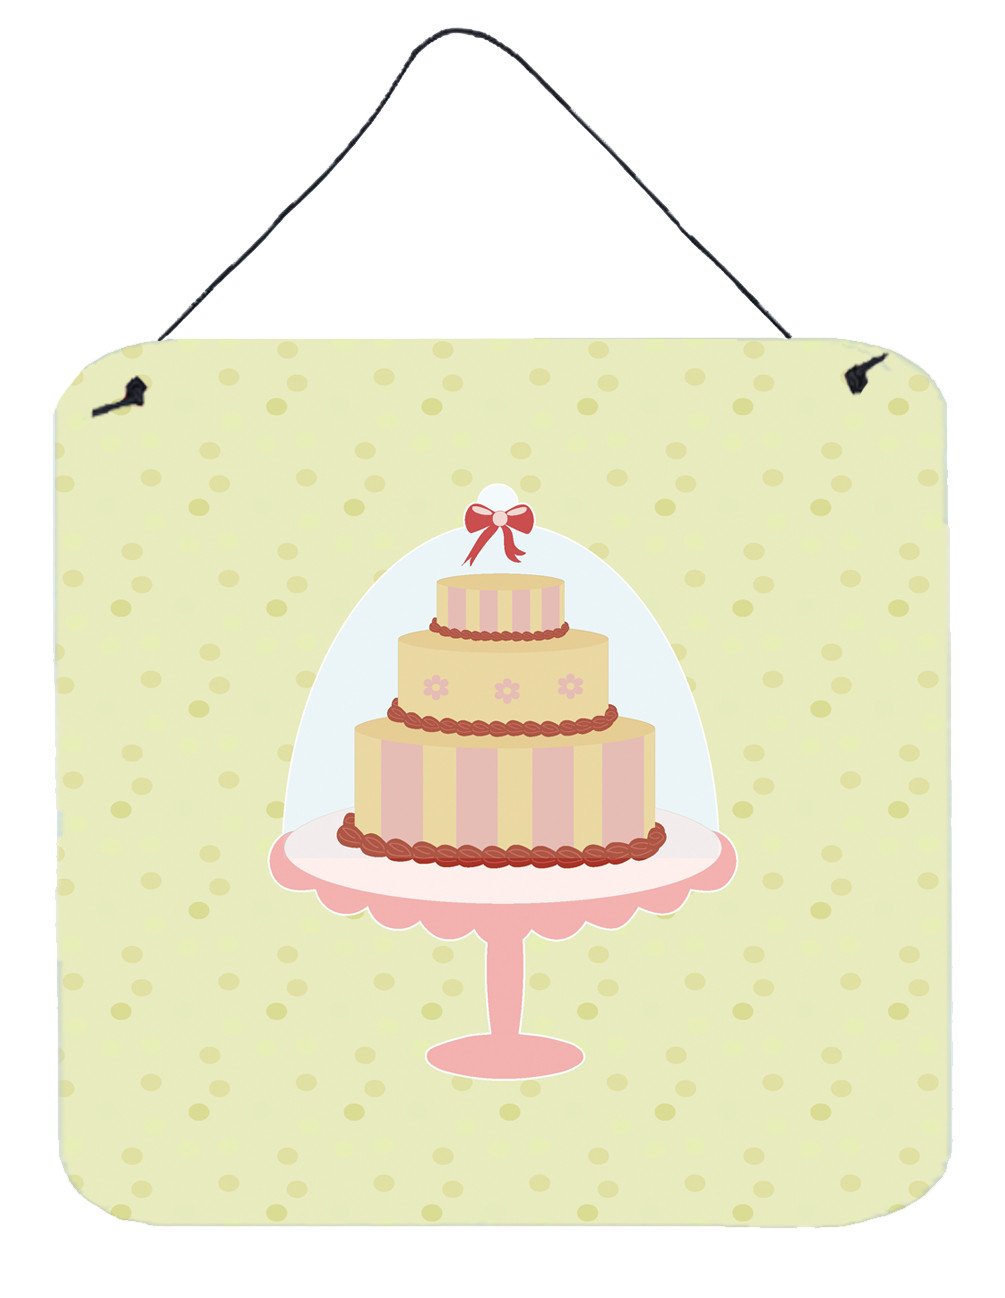 Decorated Cake on Green Wall or Door Hanging Prints BB7305DS66 by Caroline's Treasures